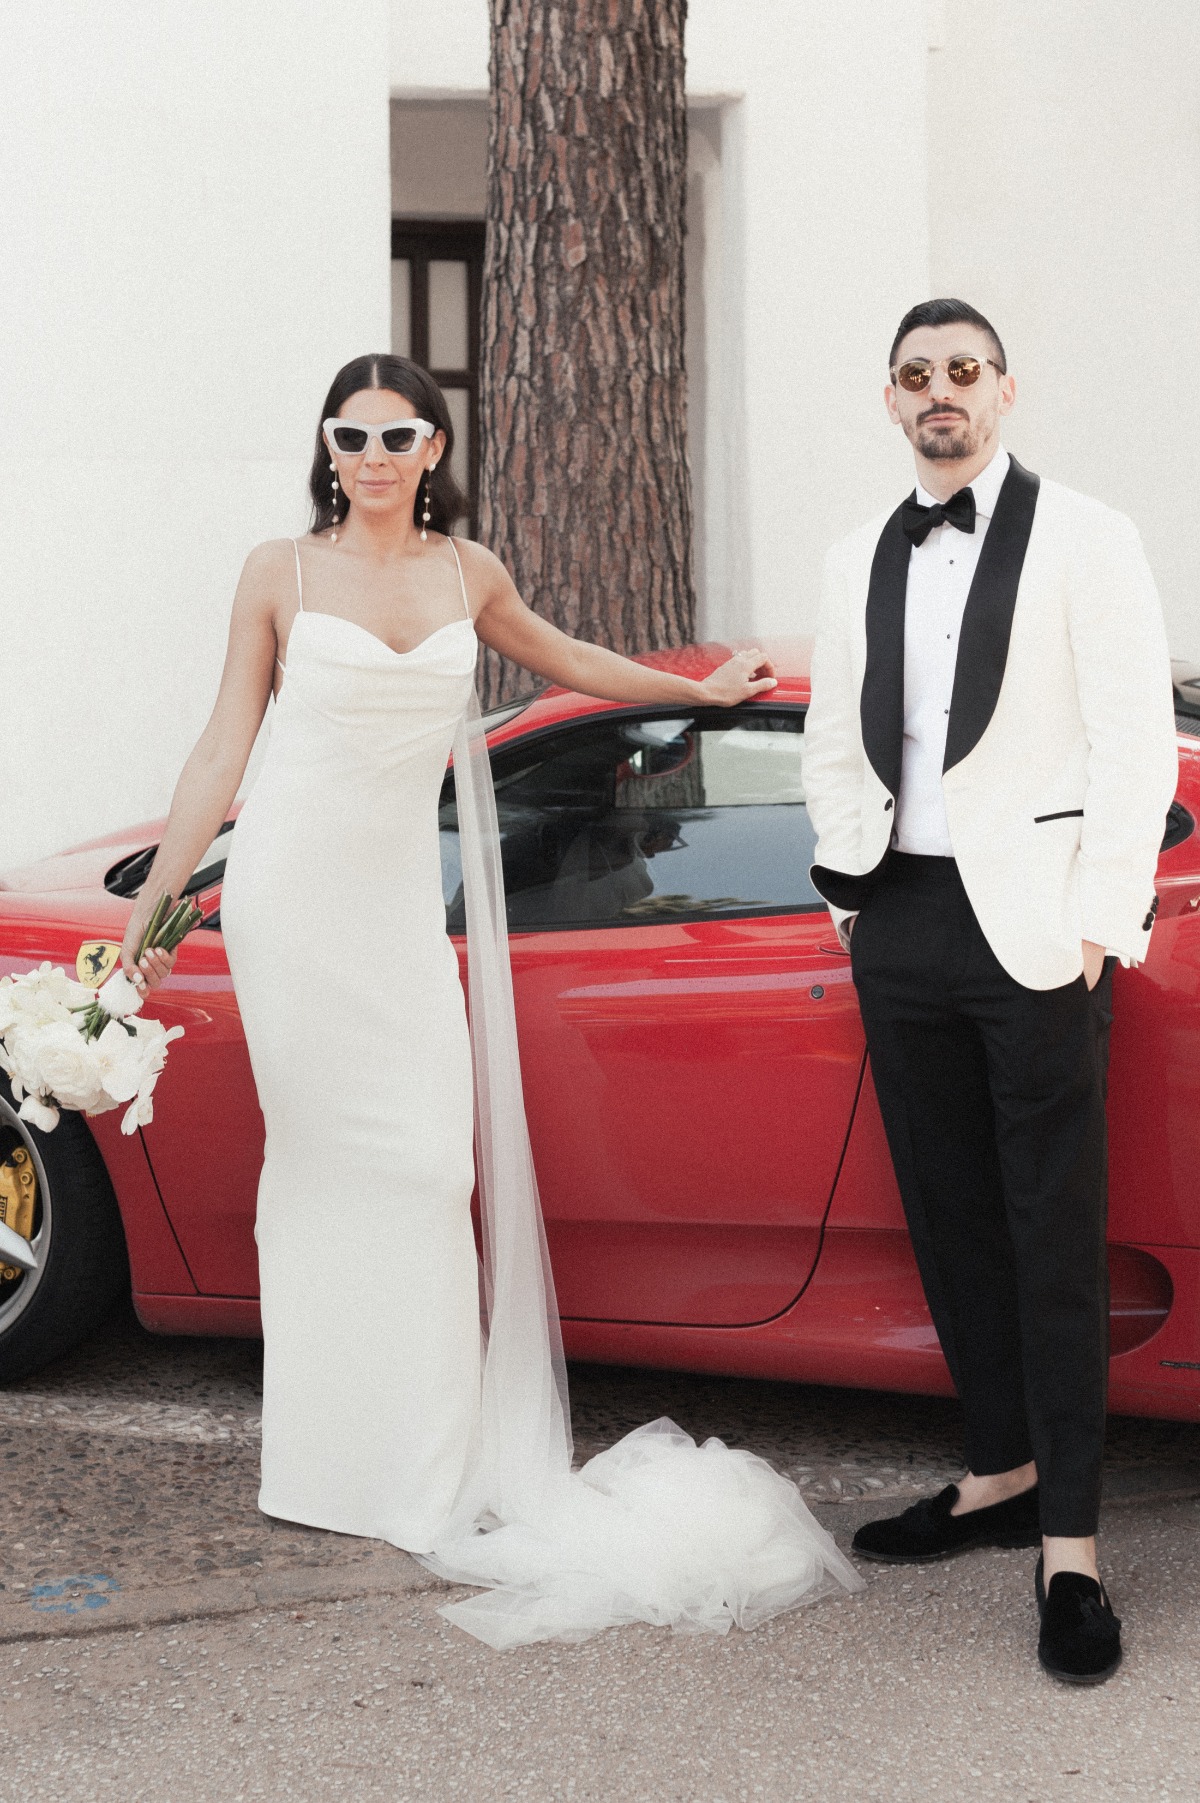 Bride and groom wearing sunglasses in front of red car